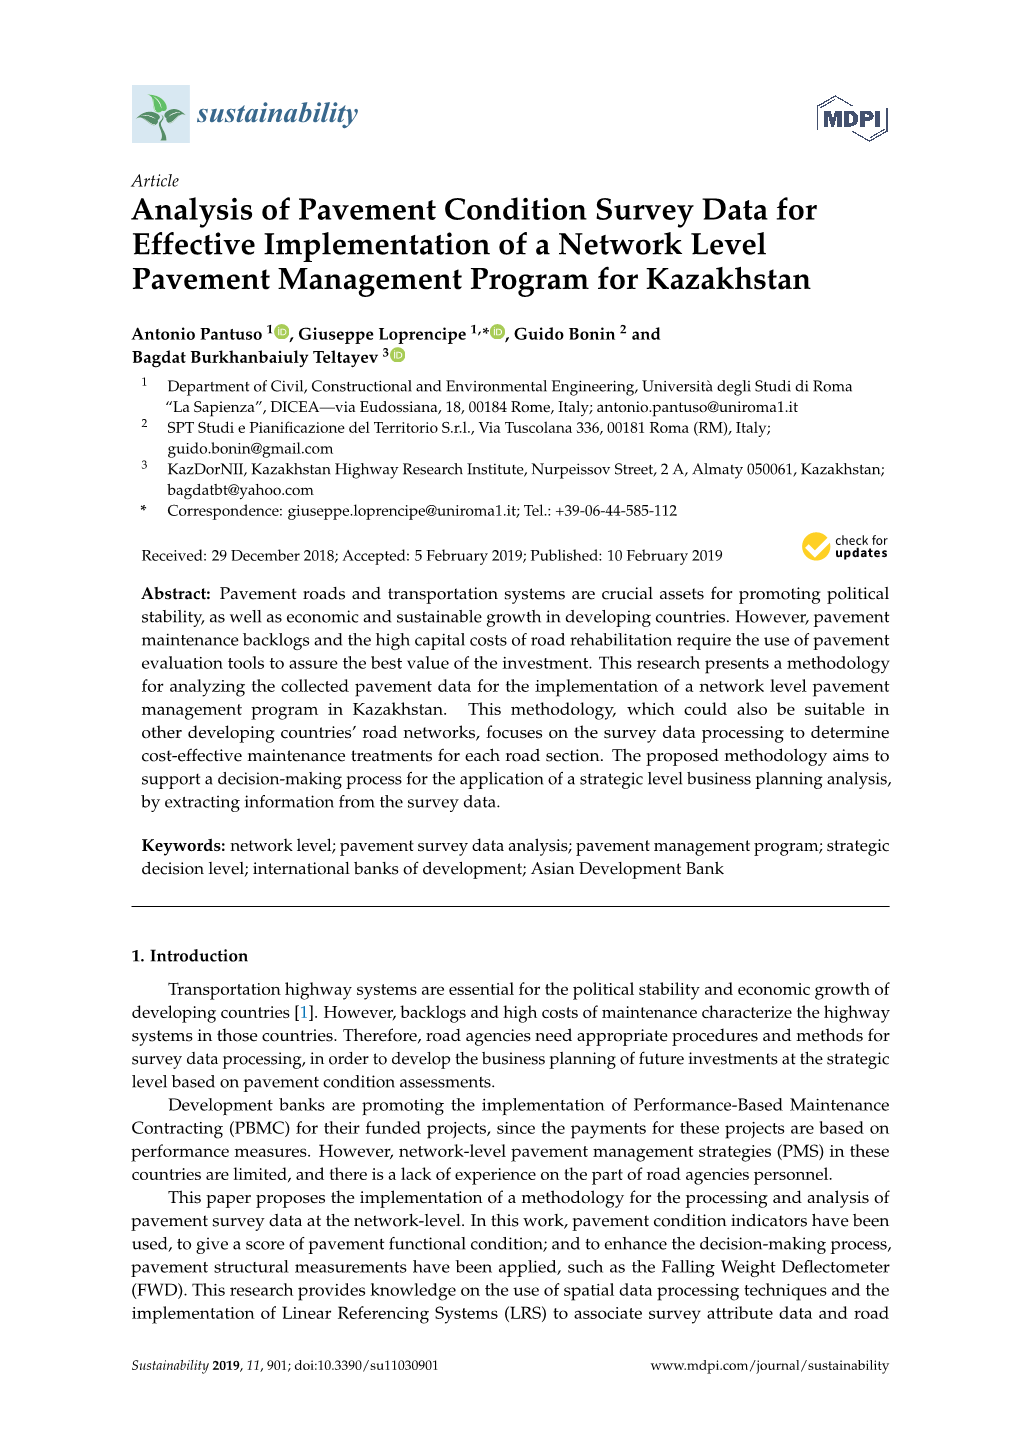 Analysis of Pavement Condition Survey Data for Effective Implementation of a Network Level Pavement Management Program for Kazakhstan